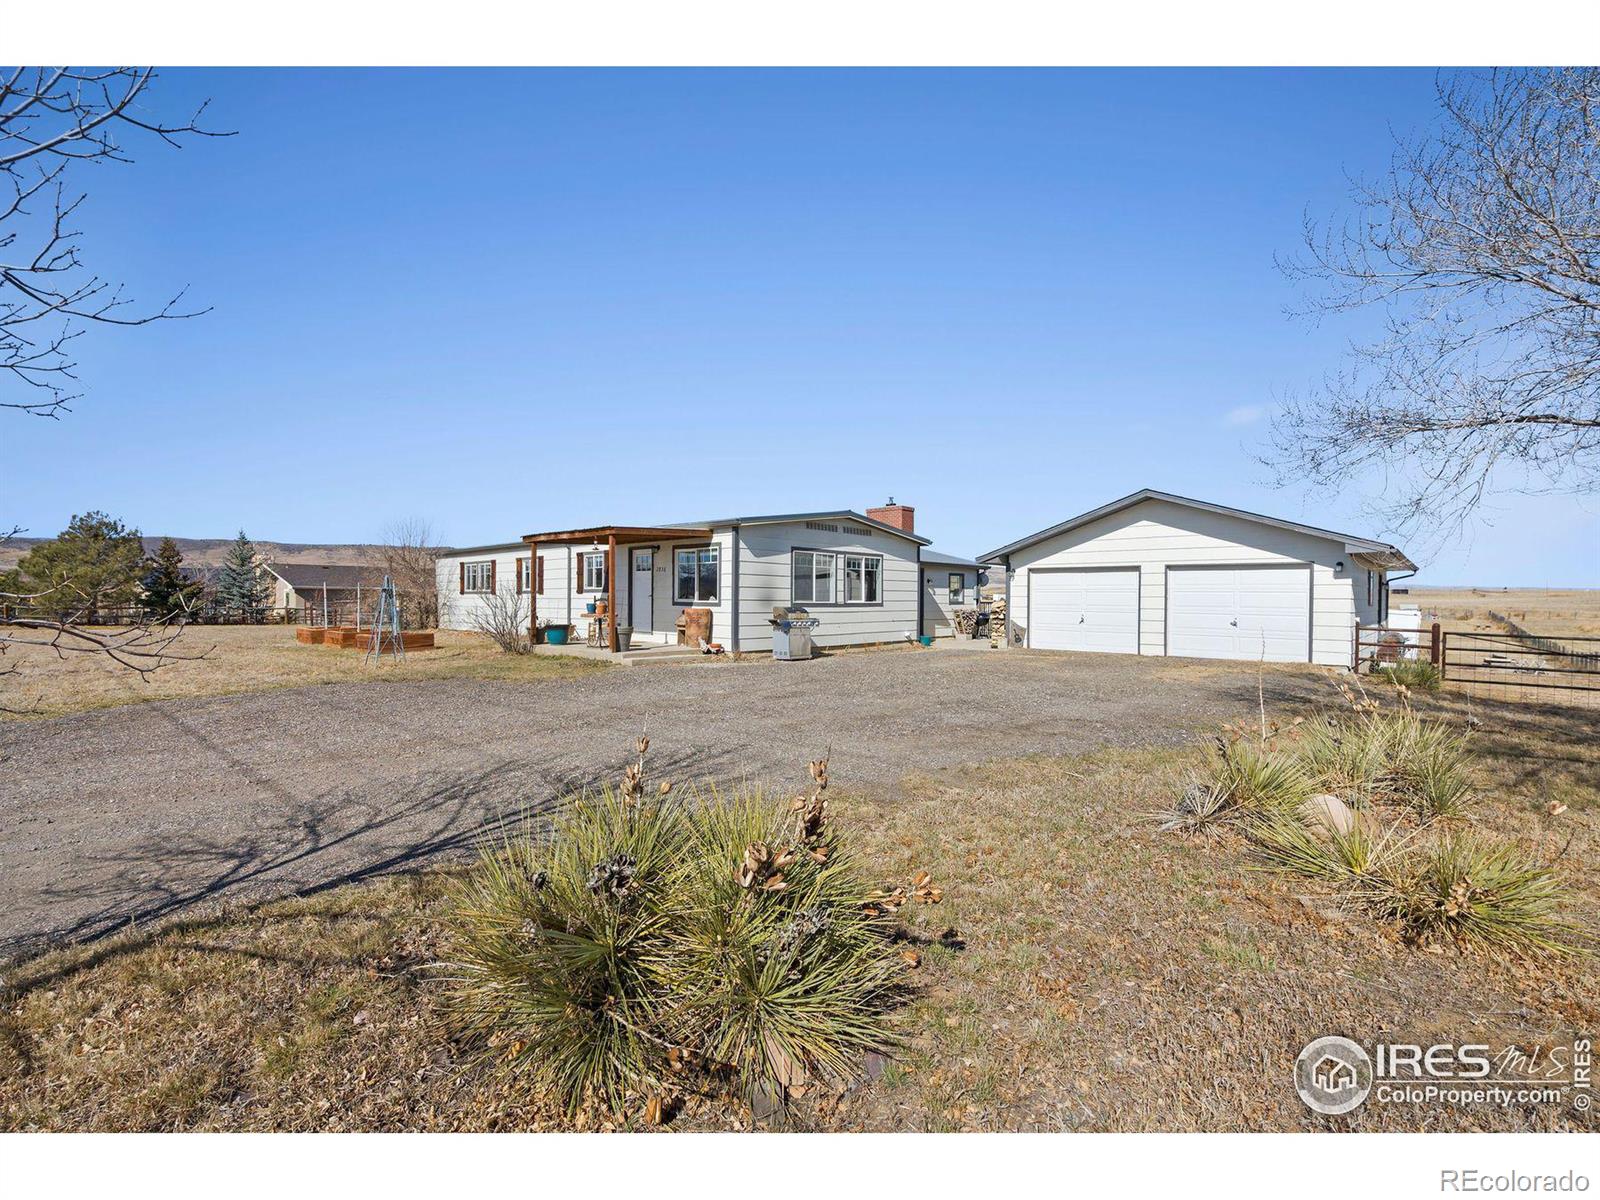 2836 W County Road 60e , fort collins MLS: 4567891003838 Beds: 3 Baths: 2 Price: $650,000